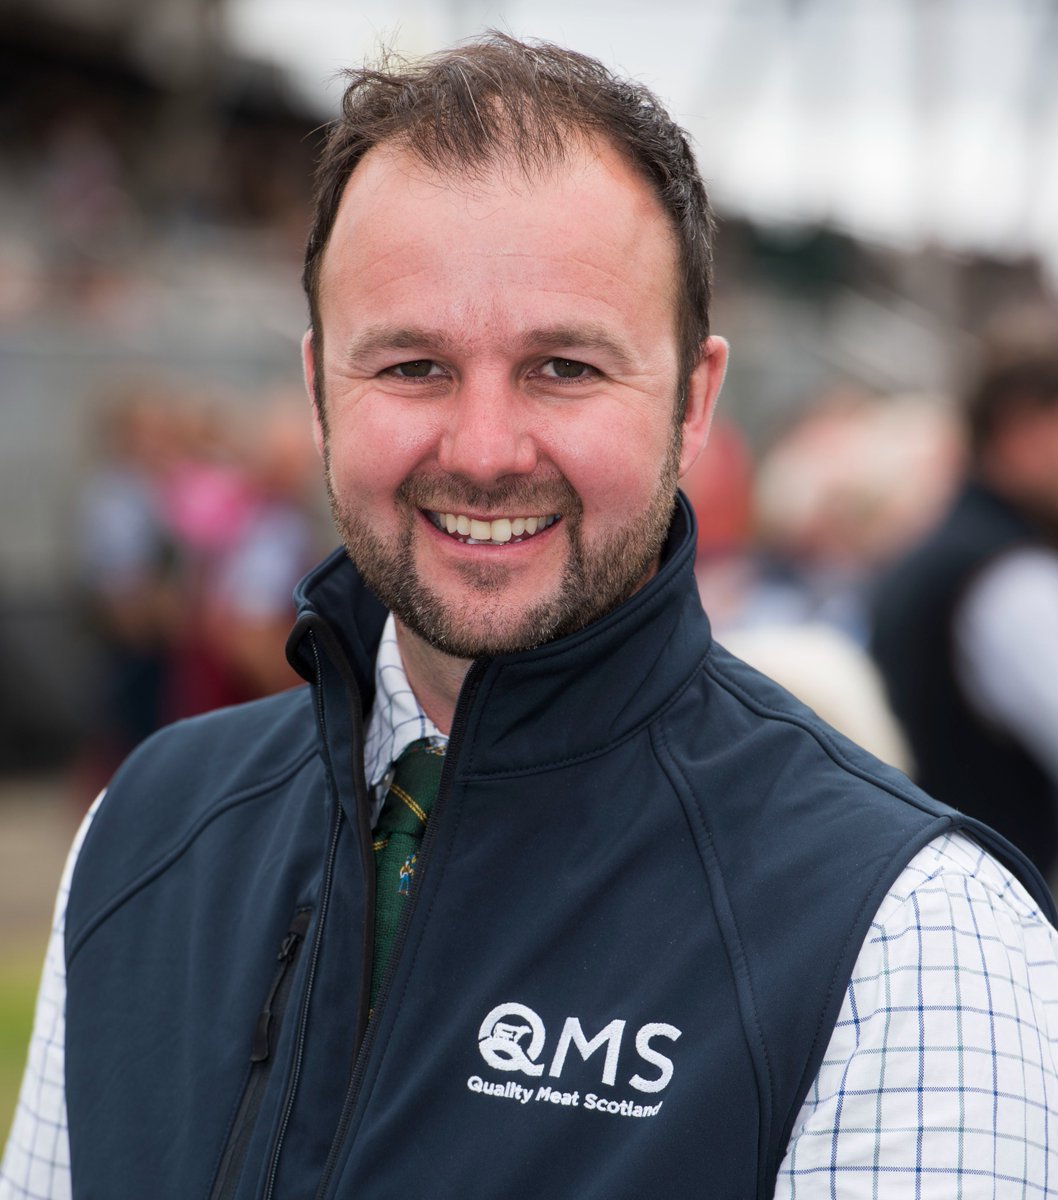 This Thursday 6th October, QMS Board member Niall Jeffrey will be attending the sale at St Boswells. If you are going to the event, look out for the QMS stand where Niall will be available to answer any queries and questions from 10.30am.